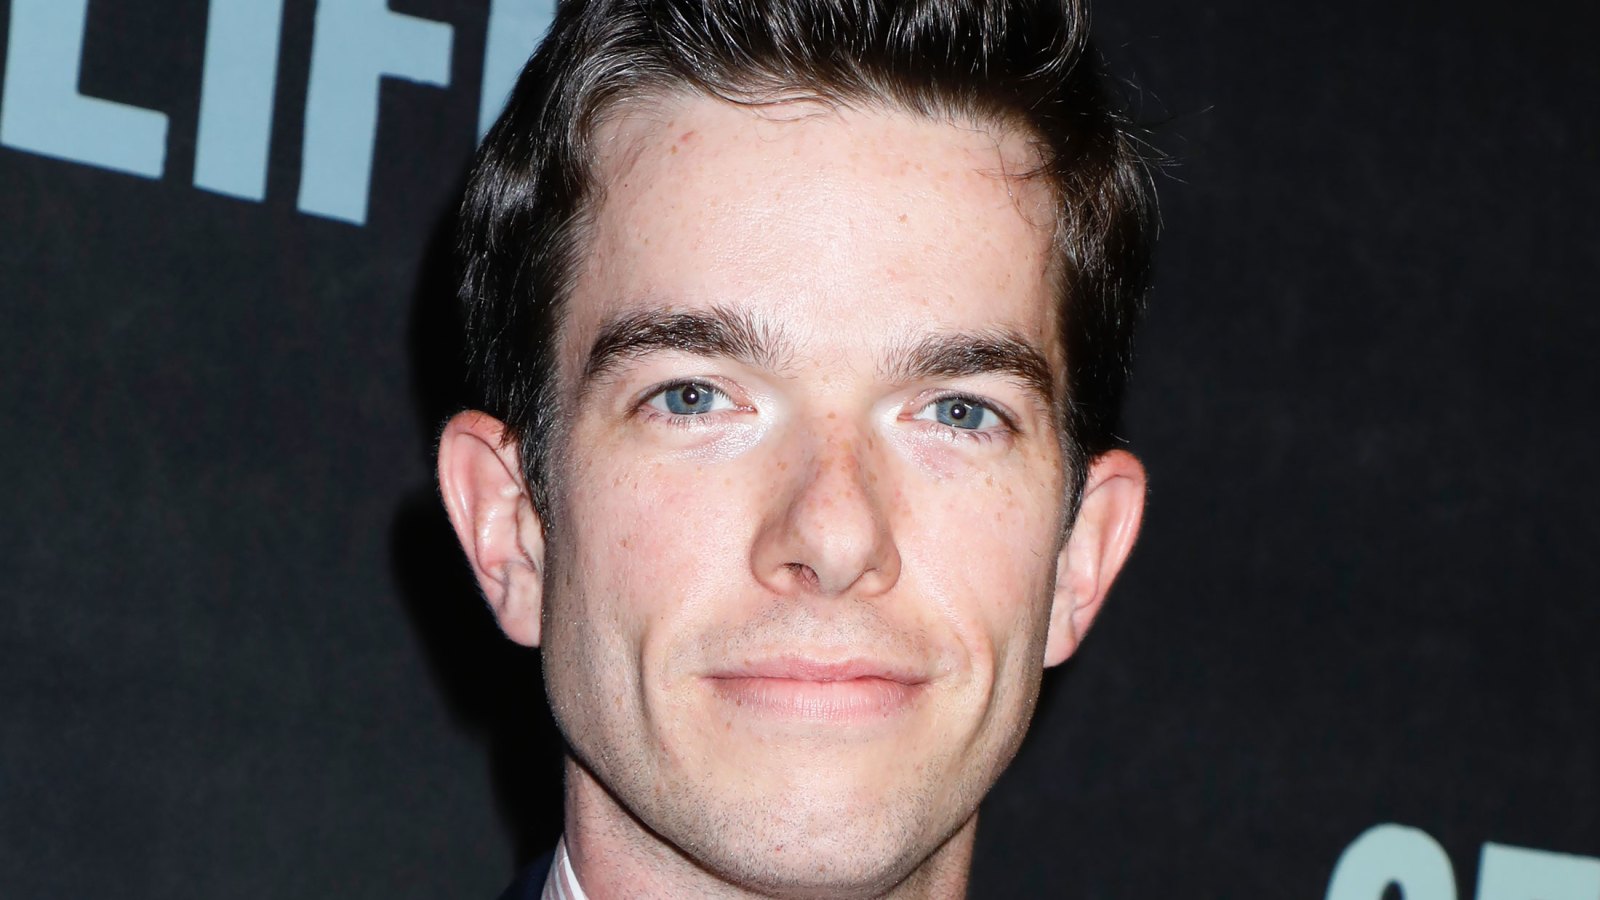 John Mulaney Has Checked Into Rehab for Alcohol and Drug Abuse